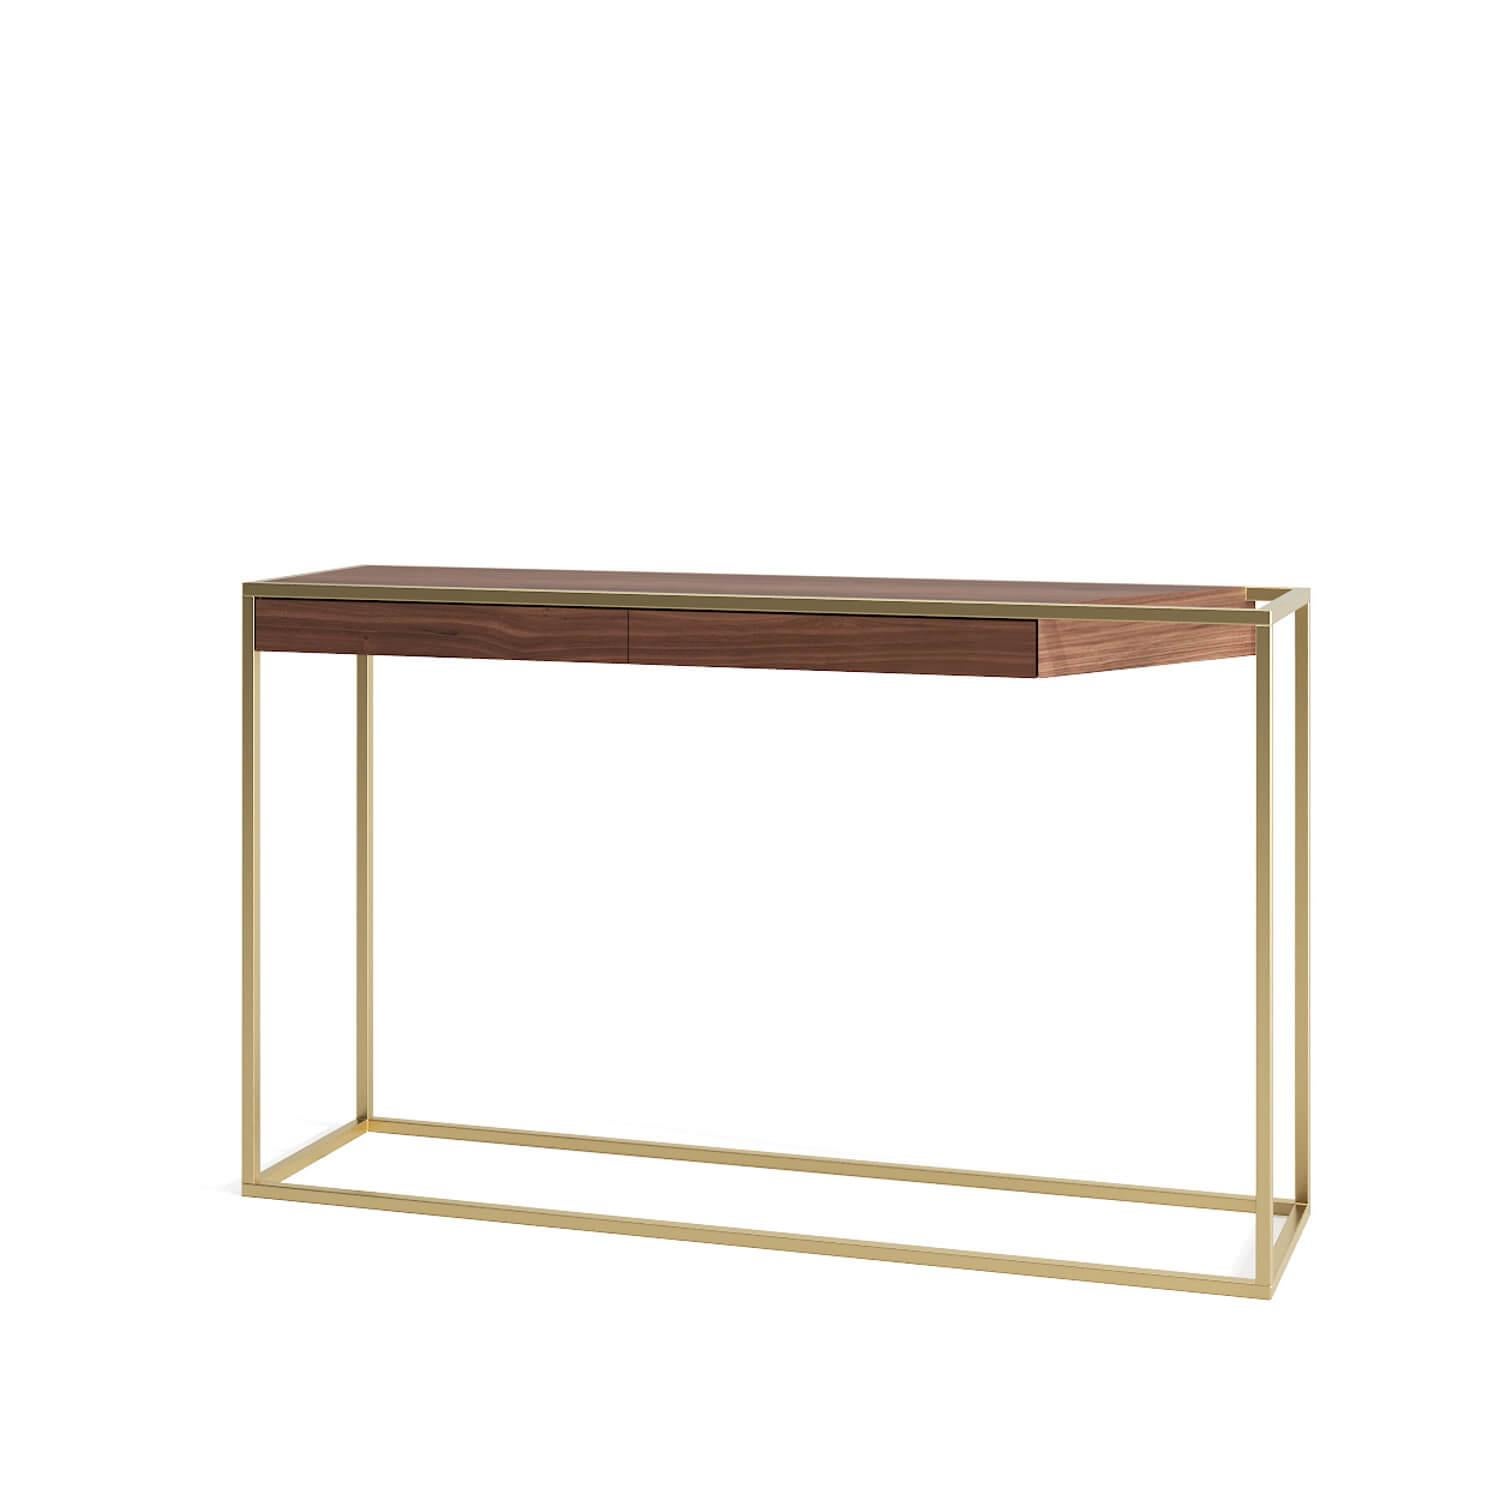 Portuguese Modern Minimalist Rectangular Console Table Walnut Wood and Brushed Brass For Sale